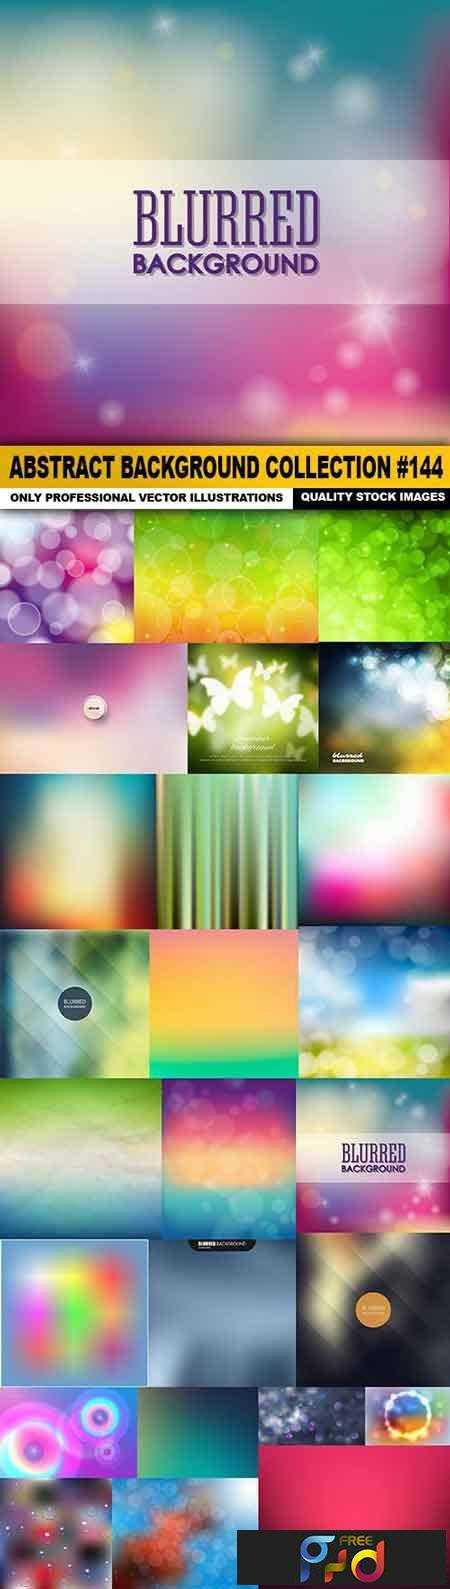 FreePsdVn.com_VECTOR_1701374_abstract_background_collection_144_25_vector